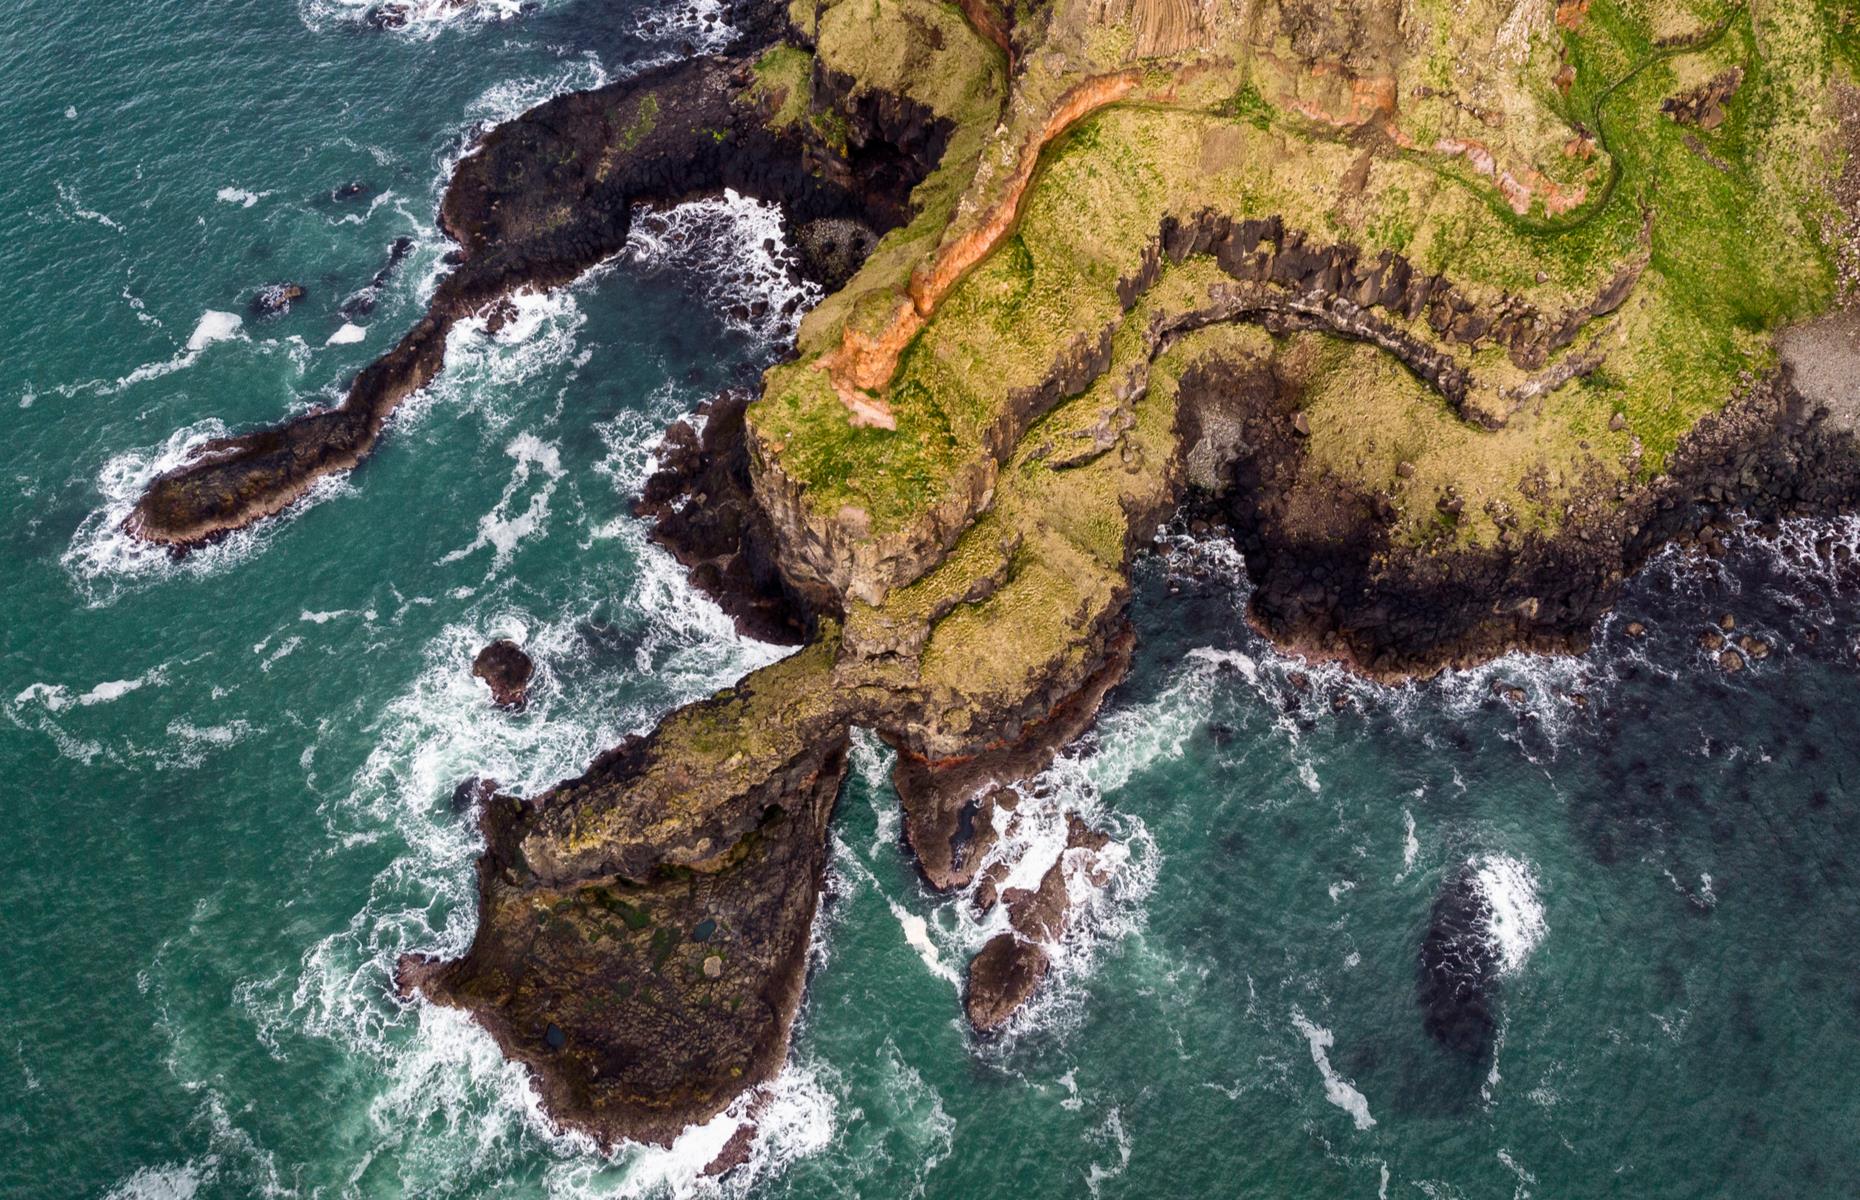 Few locations on Earth have quite such rugged charm as Northern Ireland’s Causeway Coast, a glorious stretch of coastline encompassing impressive landforms, medieval castles and cliff-side roads – as well as the famous Giant’s Causeway. In this aerial photograph, the region’s elemental beauty is captured in its dark basalt rock and crashing waves.